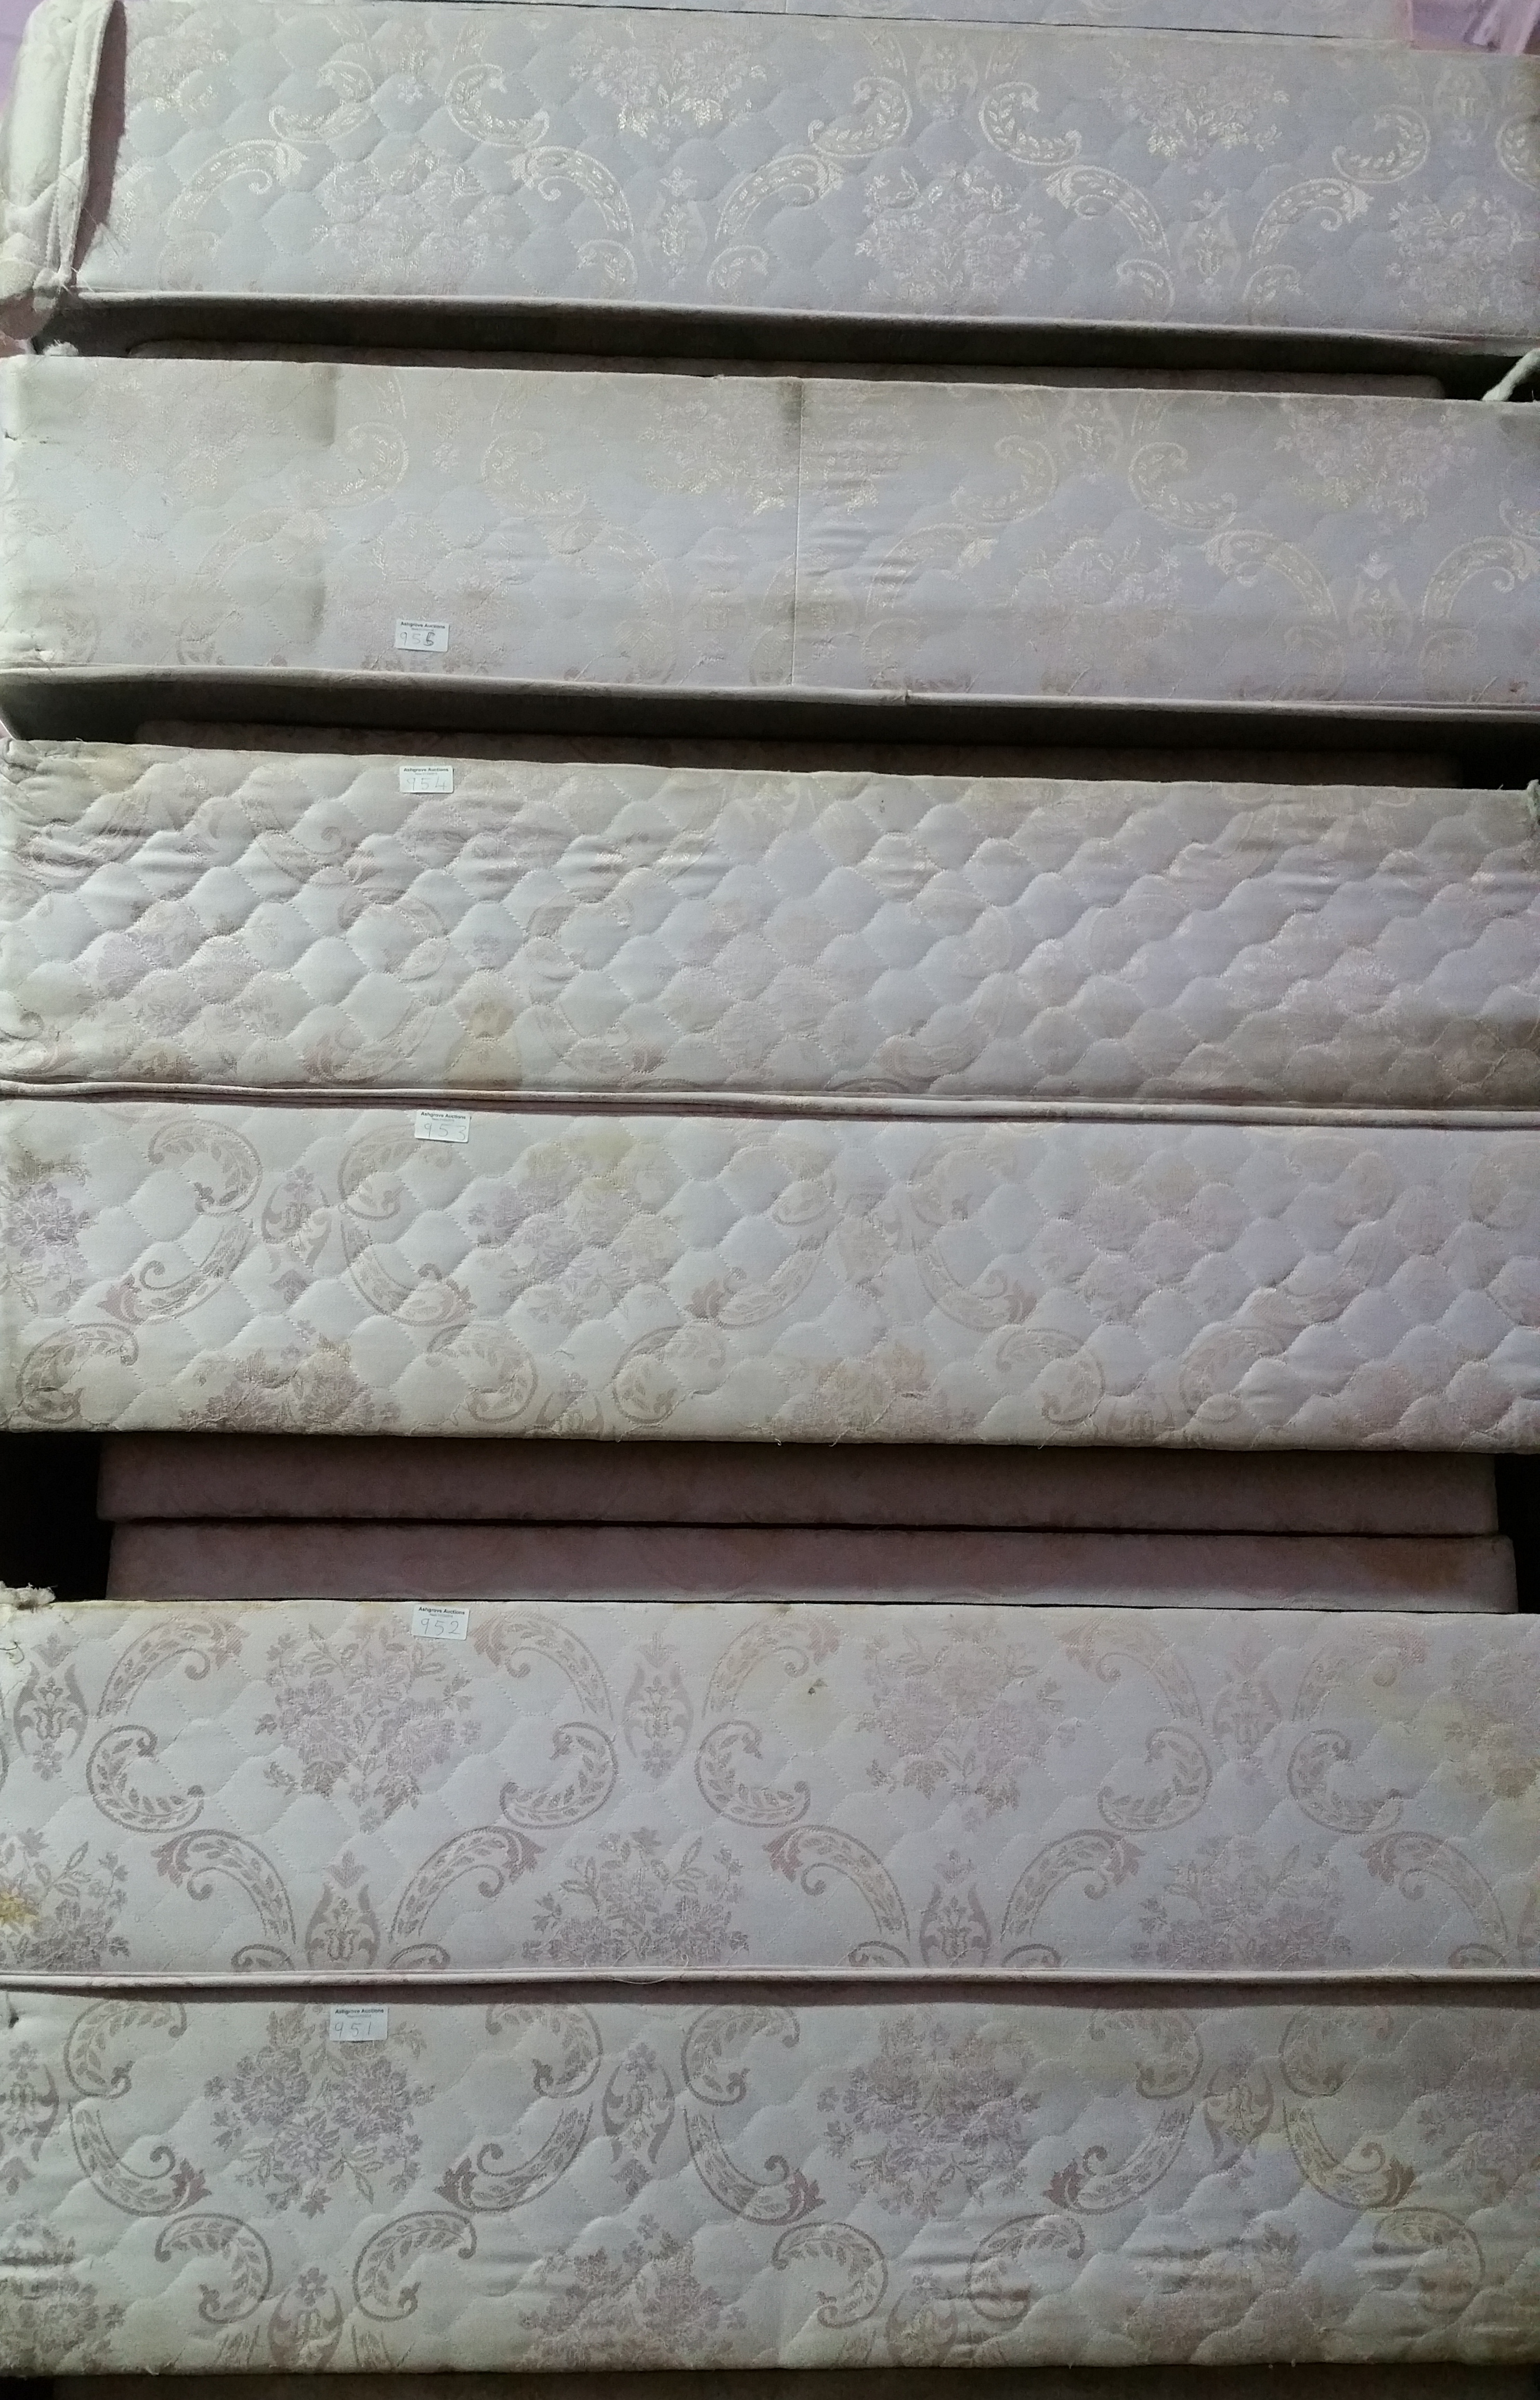 A Four Foot Respa Mattress & Base. - Image 2 of 2